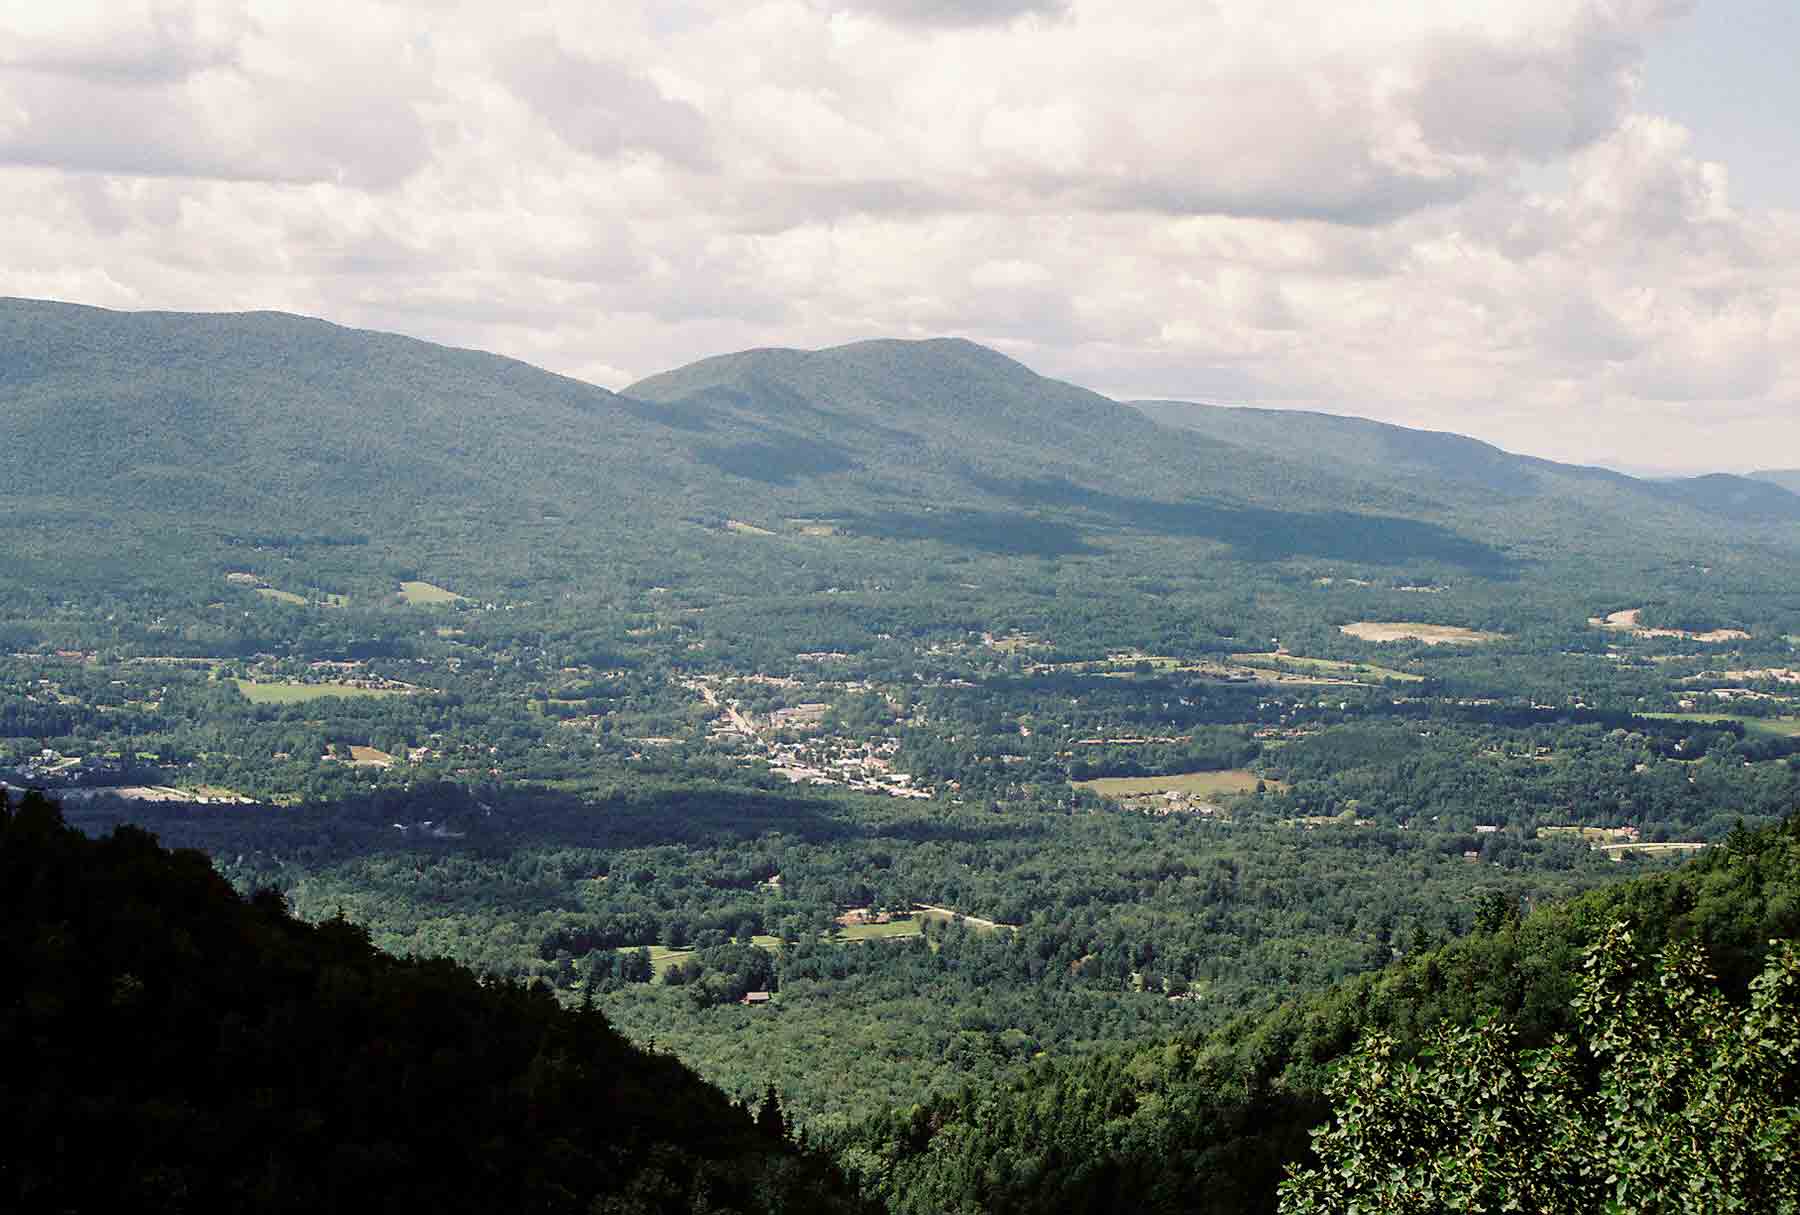 mm 4.9 - View of Manchester and the valley of Vermont from Prospect Rock. Courtesy dlcul@conncoll.edu